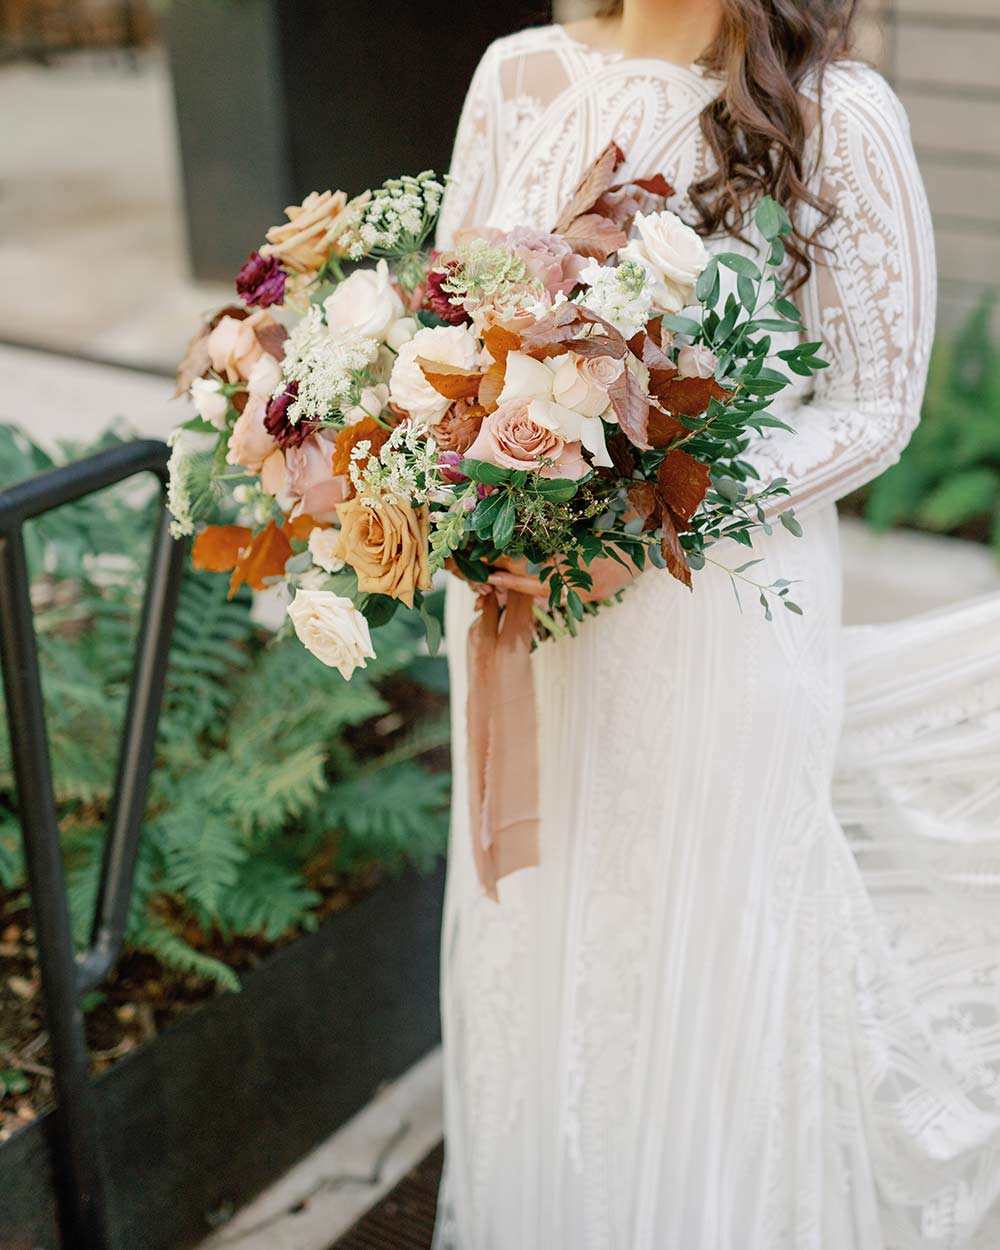 Find the best wedding vendors and wedding inspiration in San Antonio